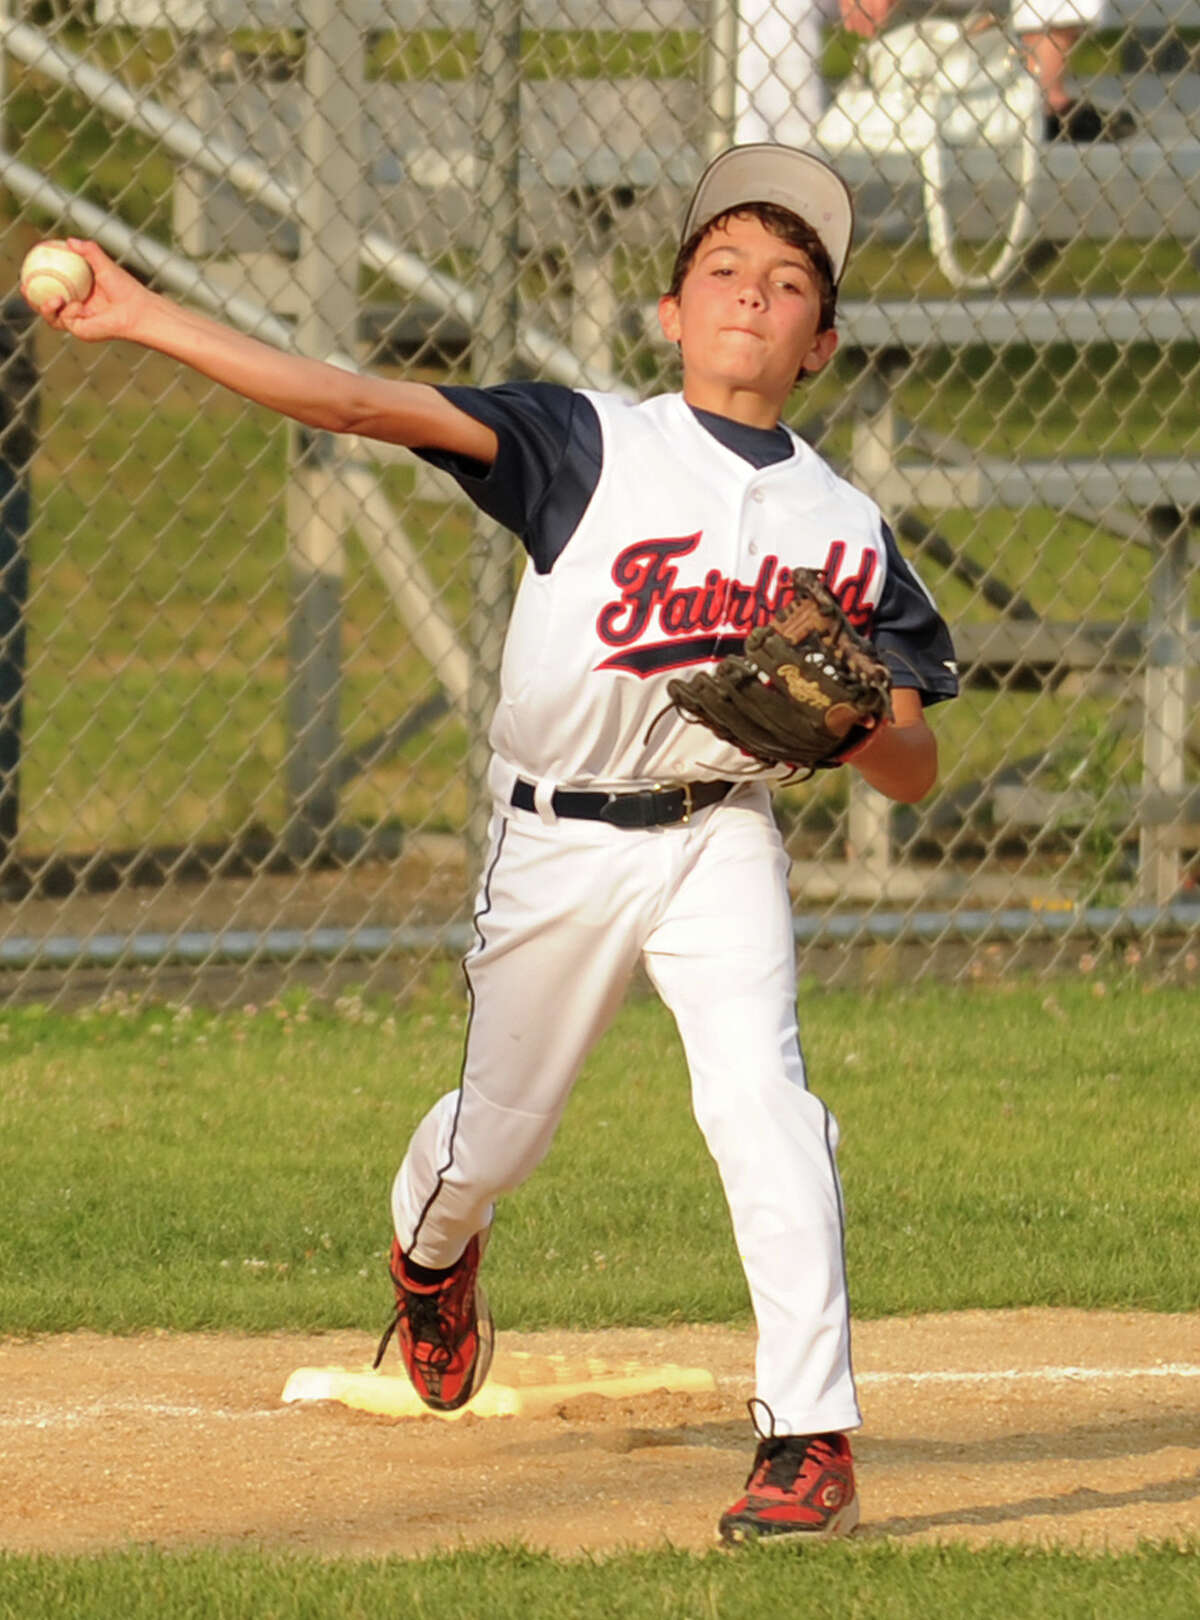 Fairfield National v. Monroe in the opening game of the Little League District 2 double elimination tournament at Unity Park in Trumbull, Conn. on Monday, July 7, 2014.